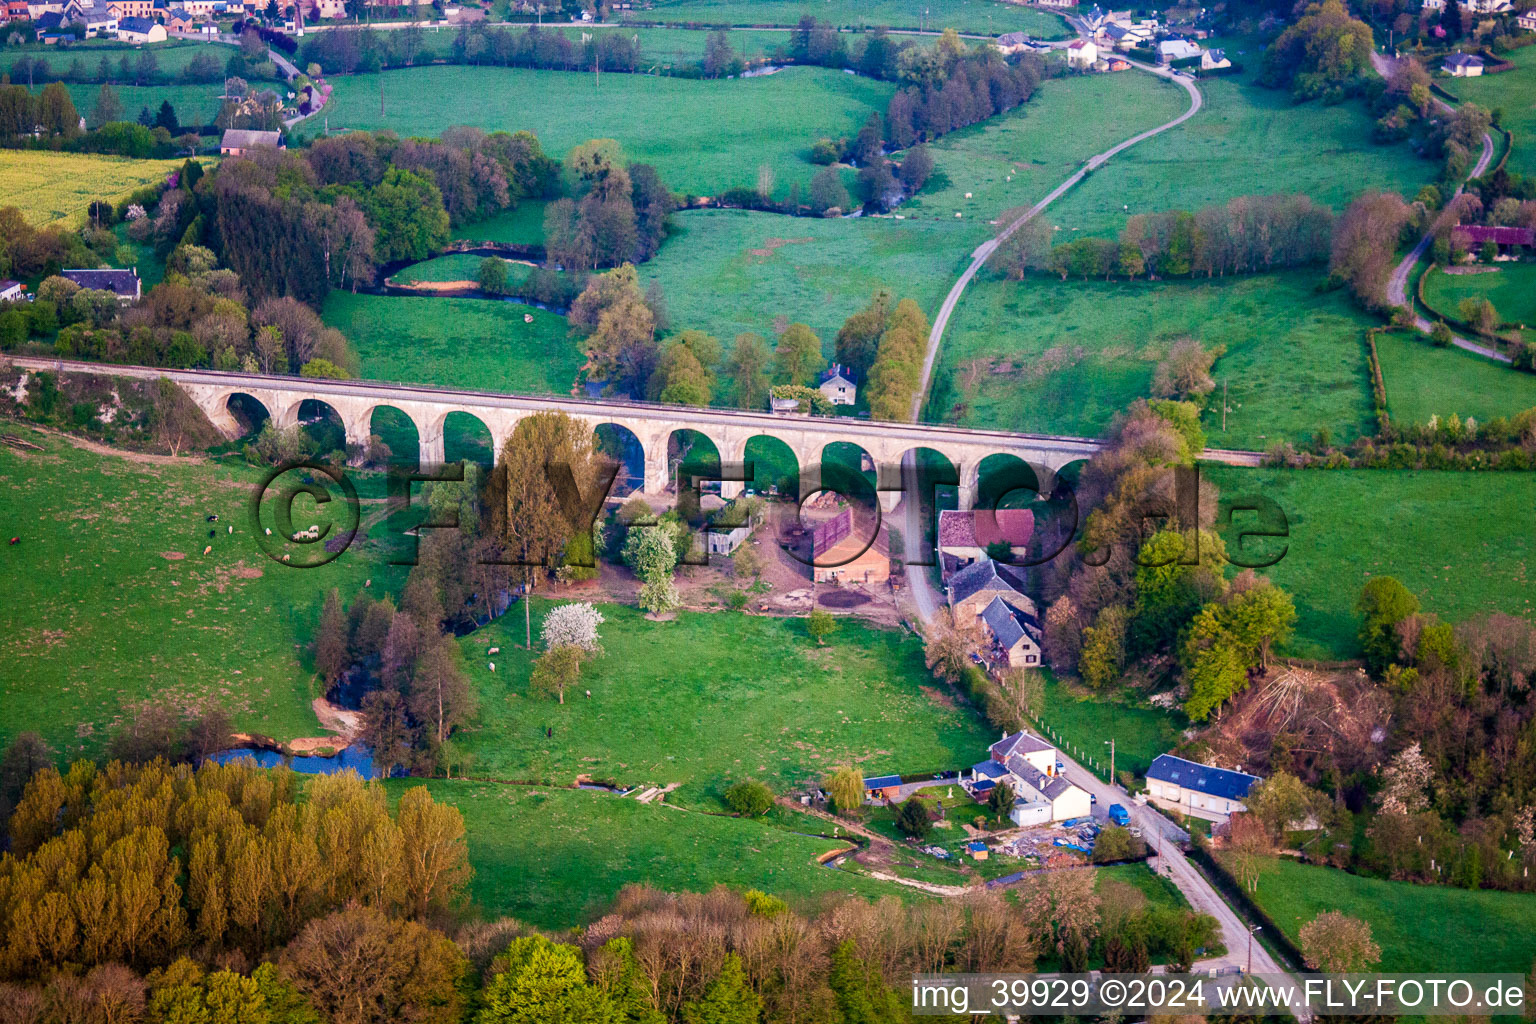 Viaduct of the railway bridge structure to route the railway tracks in Origny-en-Thierache in Hauts-de-France, France